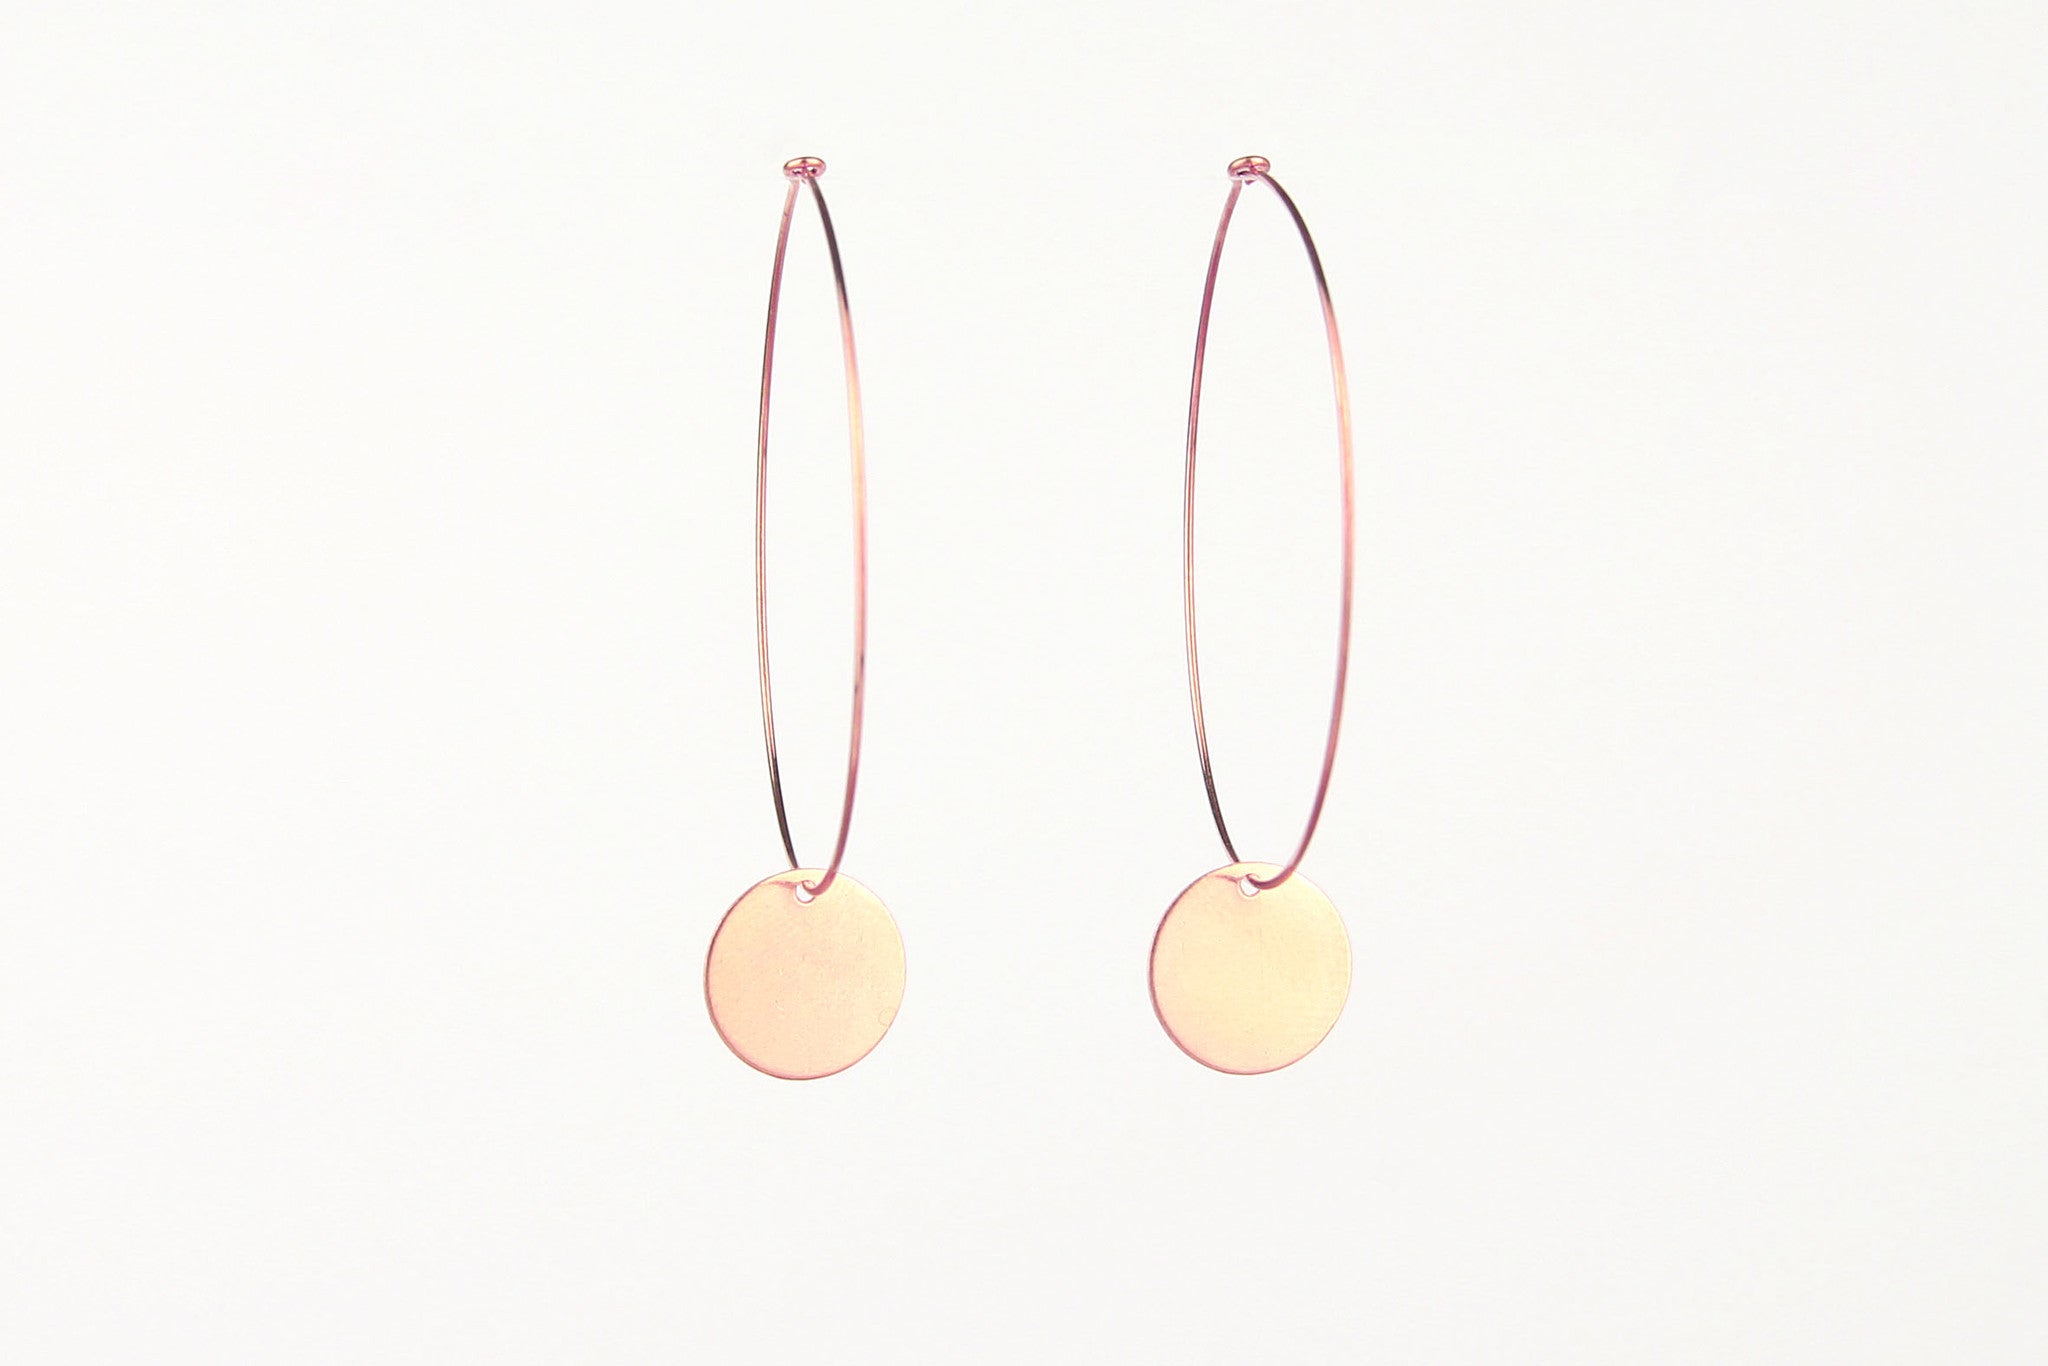 jewelberry ohrringe earrings medium disc hoops rose gold plated sterling silver fine jewelry handmade with love fairtrade